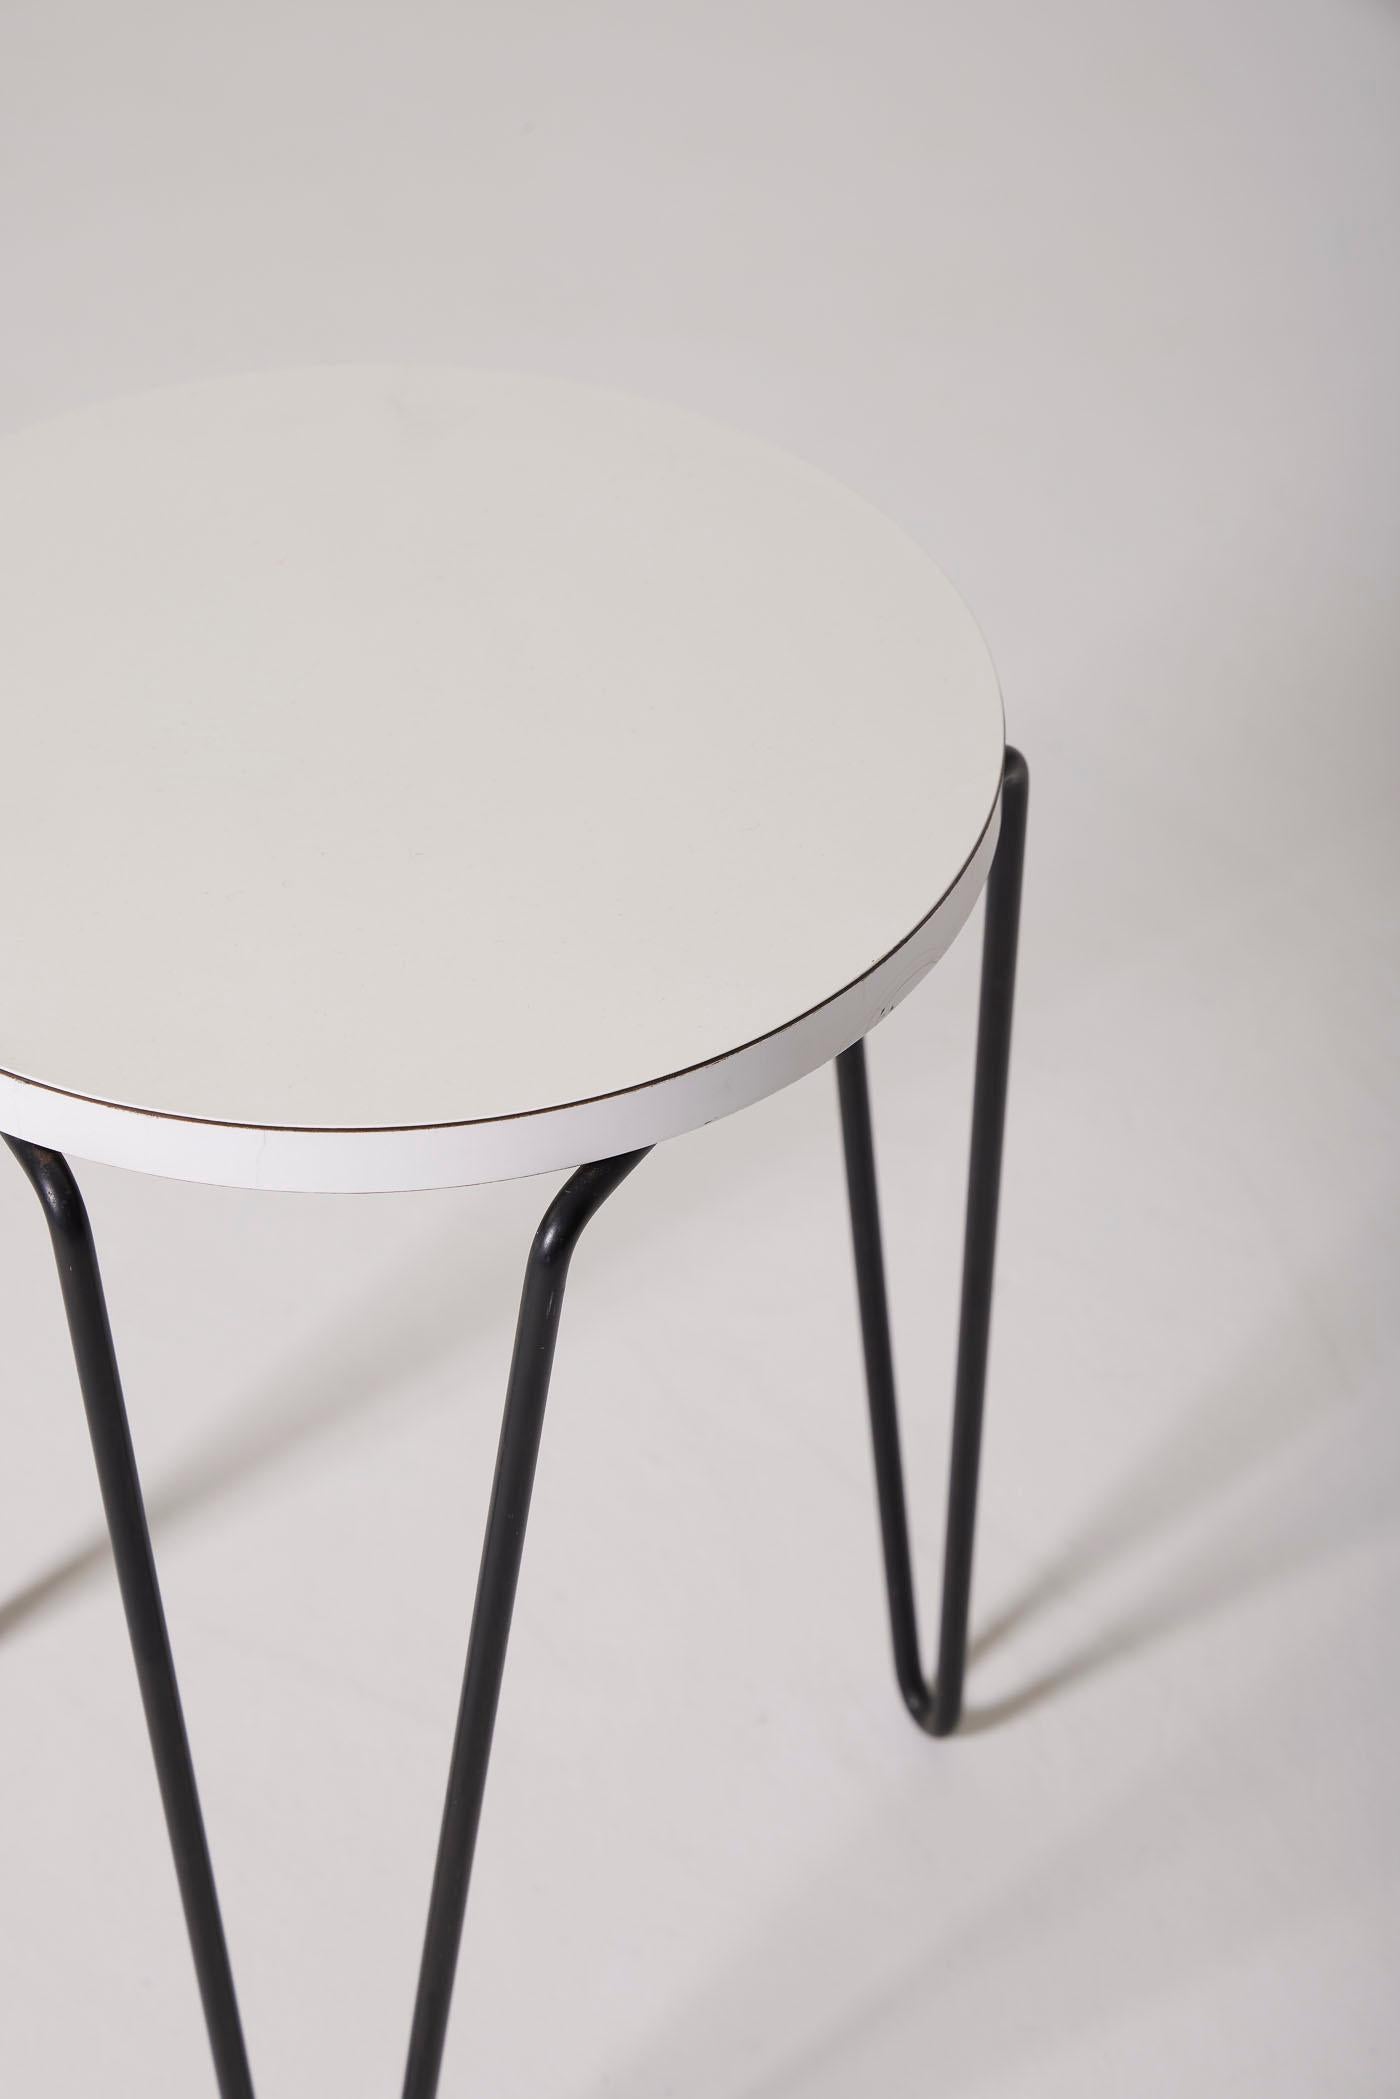 Formica  Florence Knoll stool For Sale